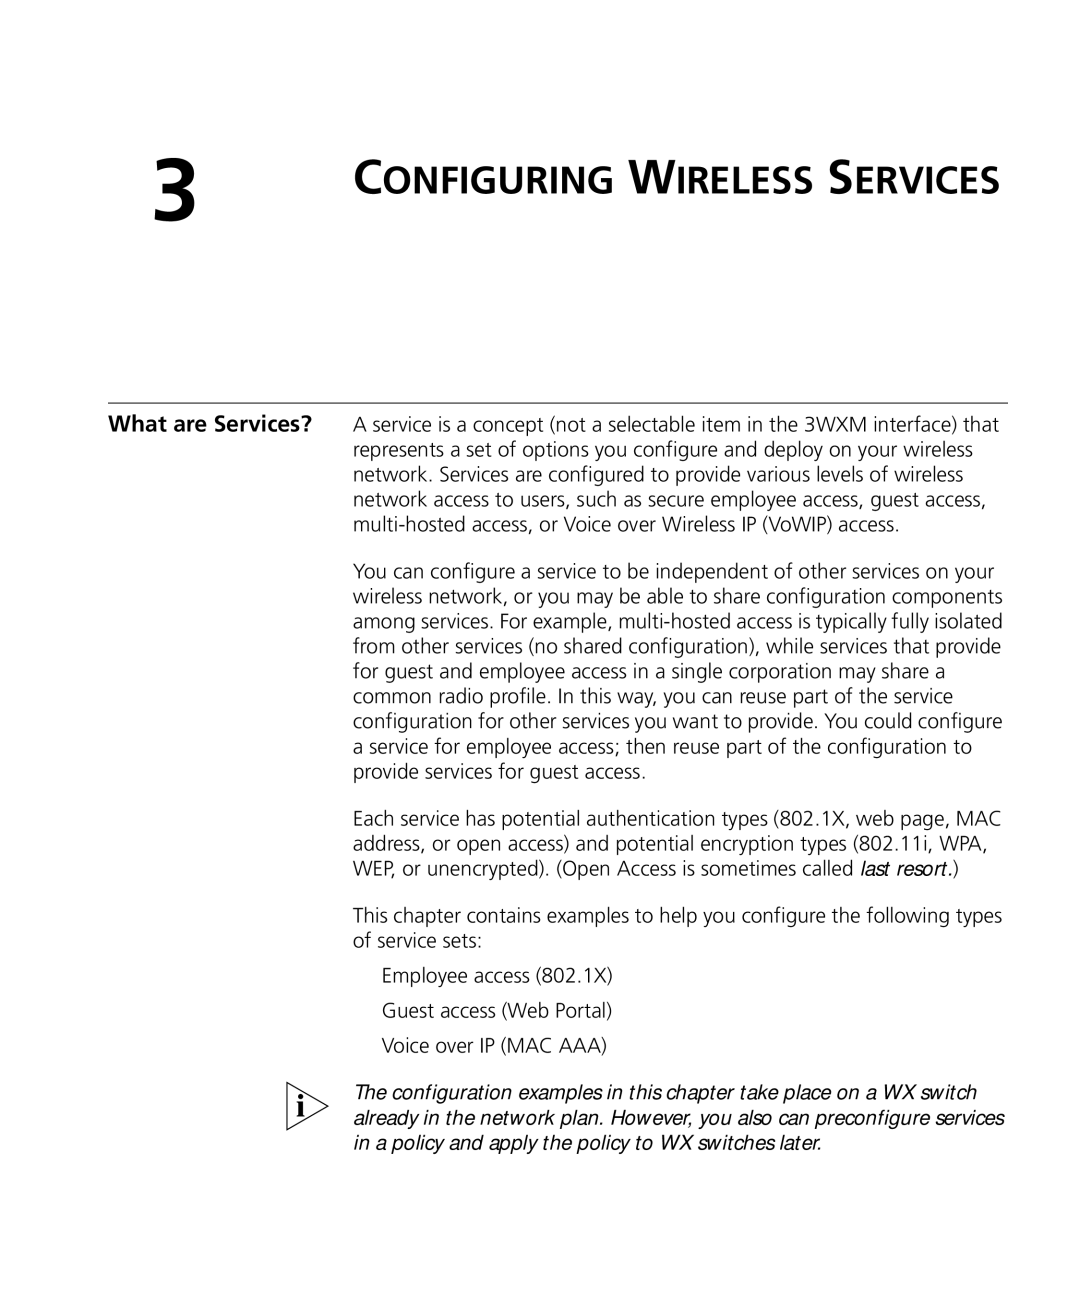 3Com WX2200 manual Configuring Wireless Services 